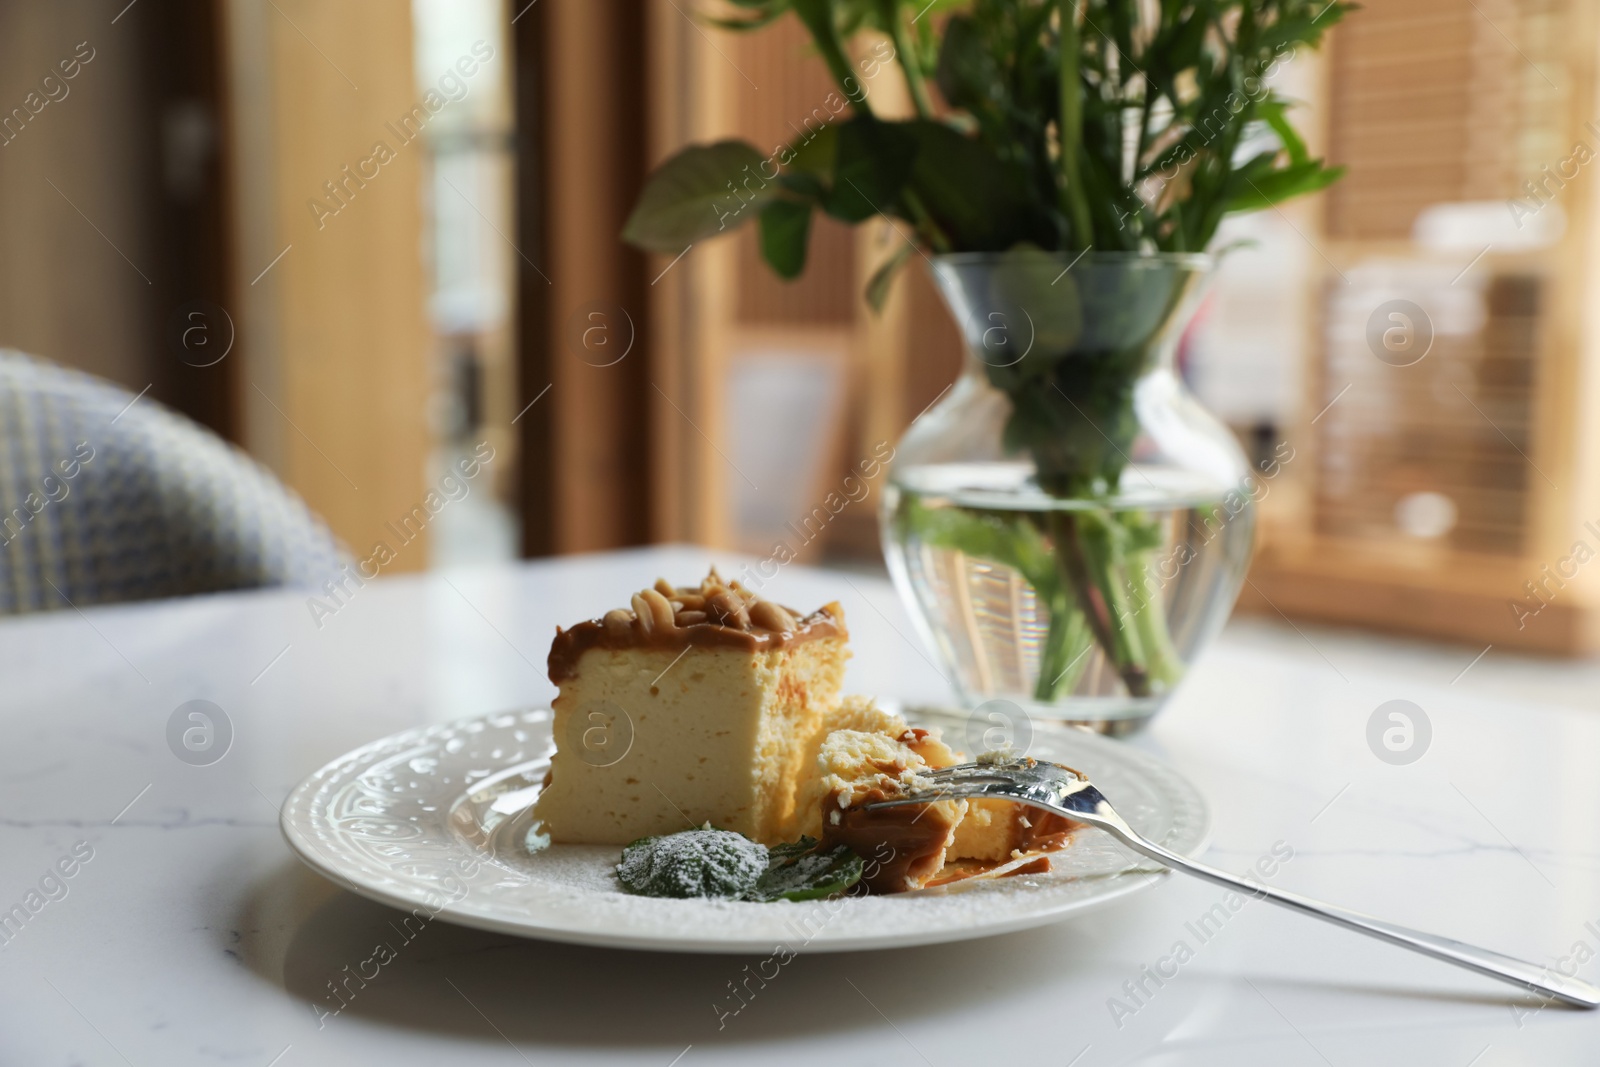 Photo of Tasty dessert and vase with flowers on white table indoors